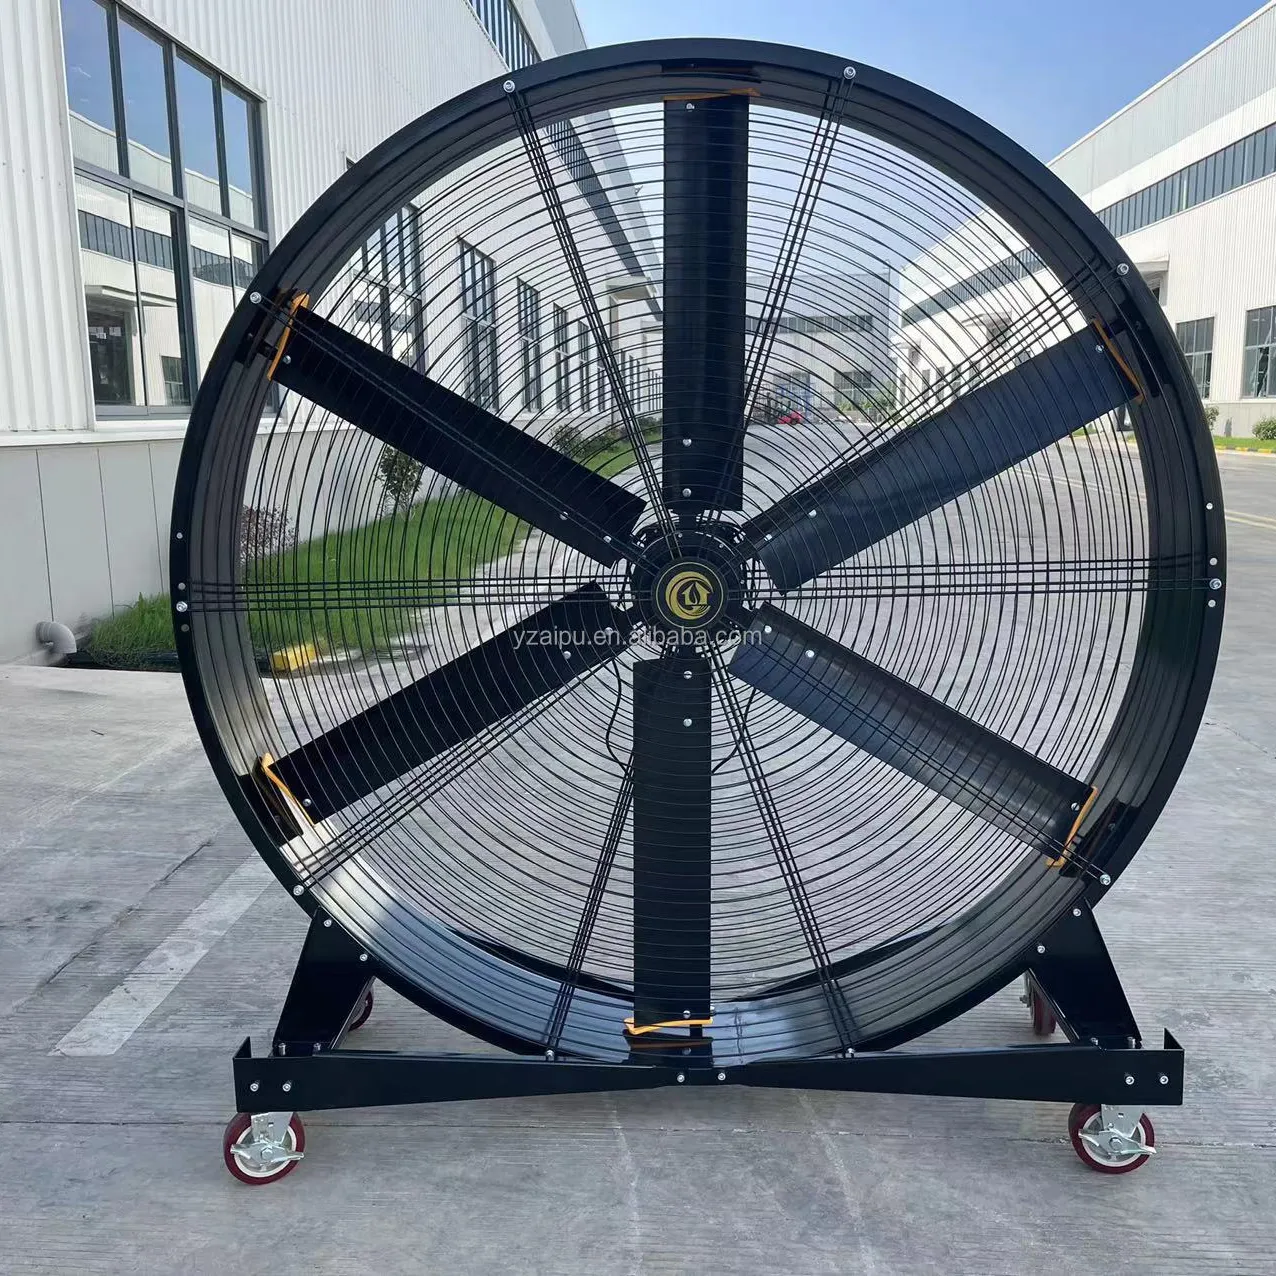 2M Diameter HVLS movable moving Fan for large space